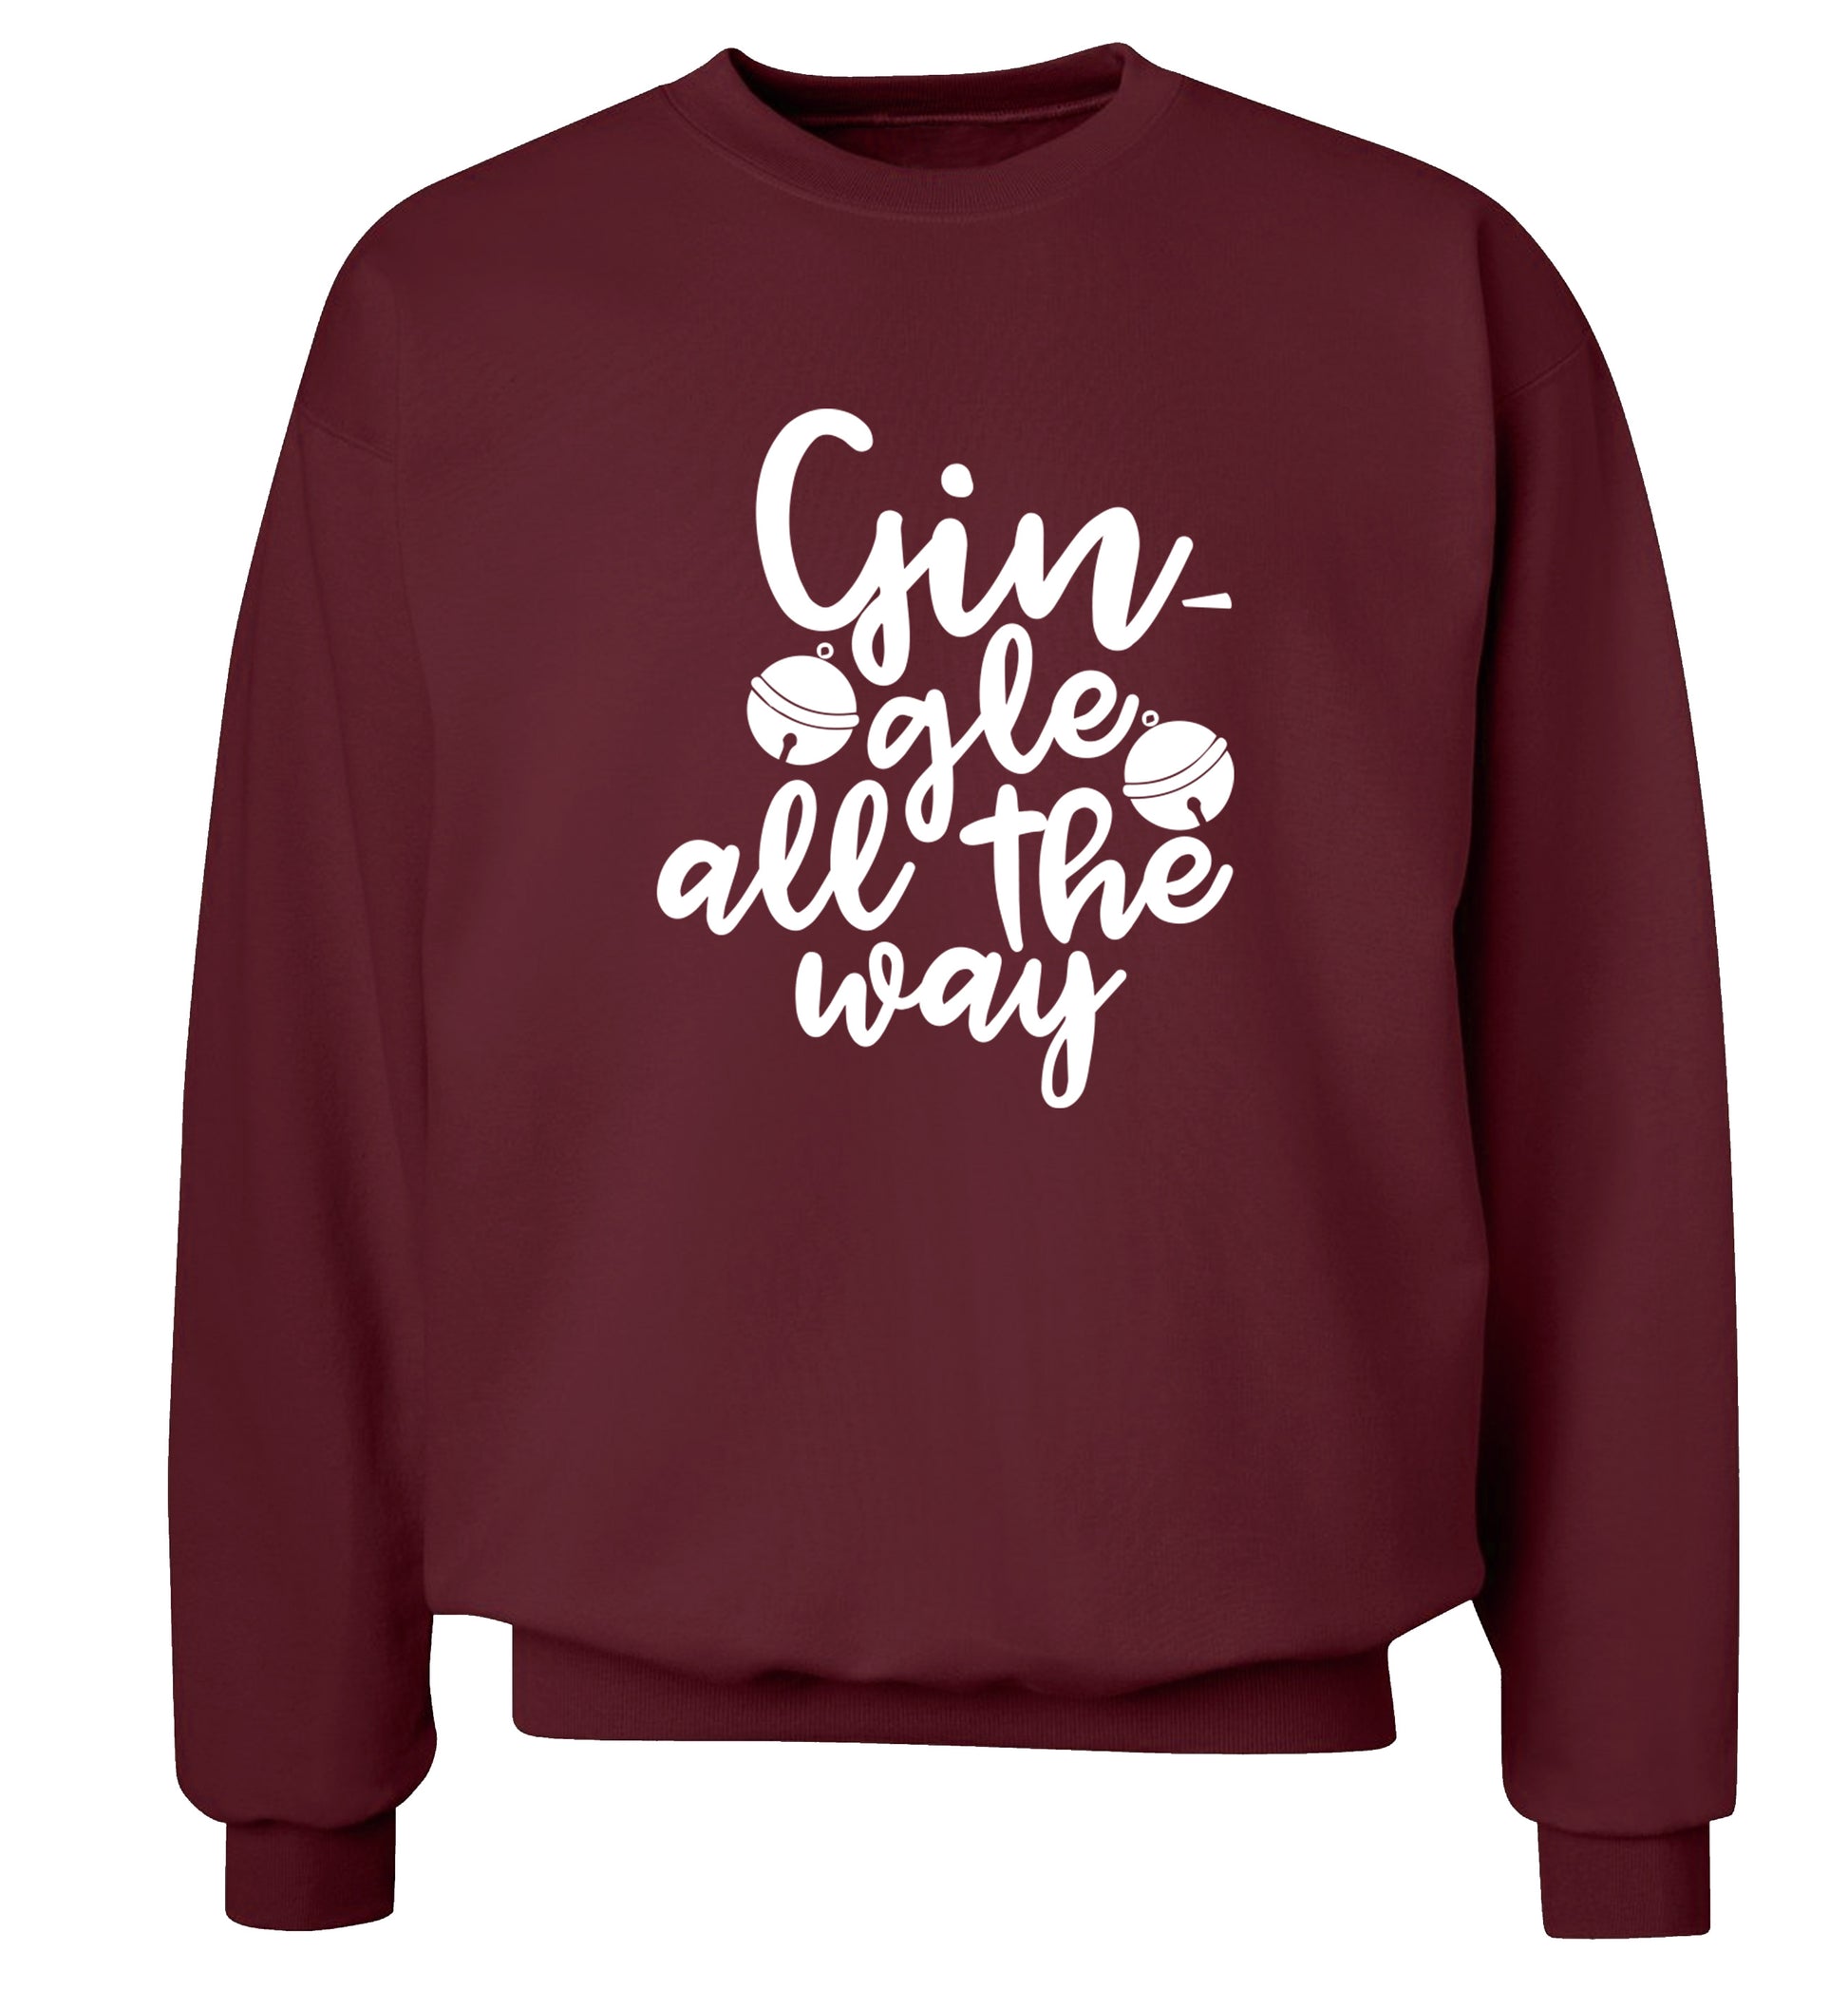 Gin-gle all the way Adult's unisex maroon Sweater 2XL